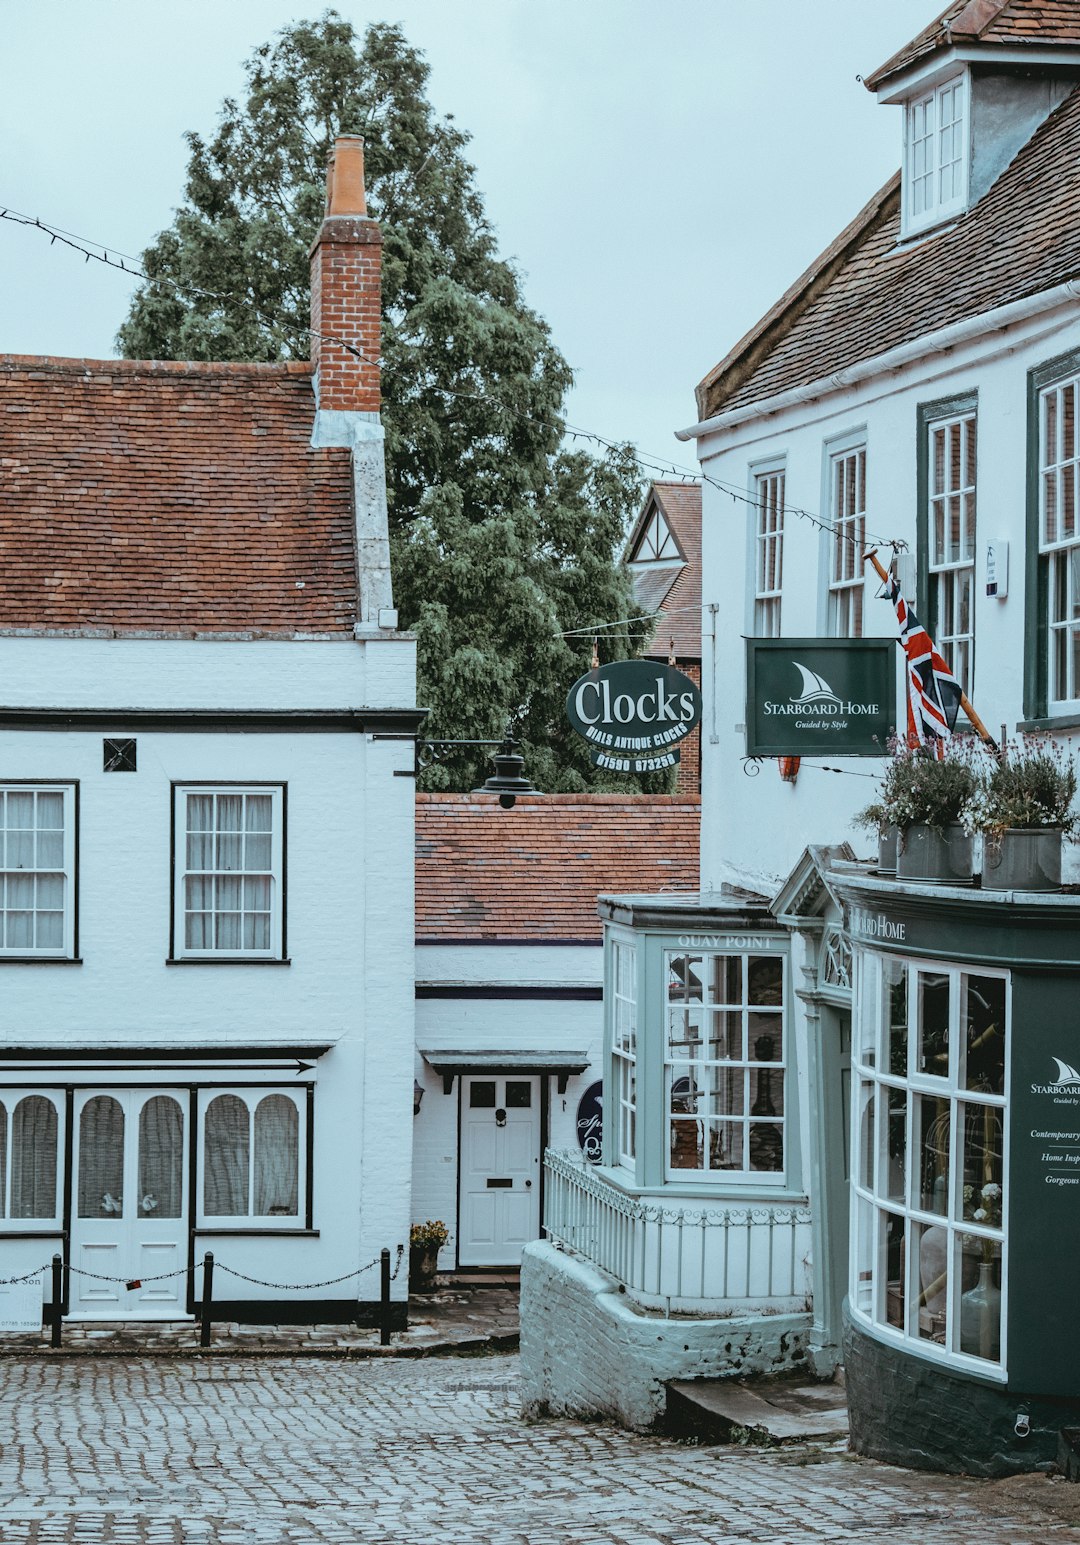 Travel Tips and Stories of Lymington in United Kingdom